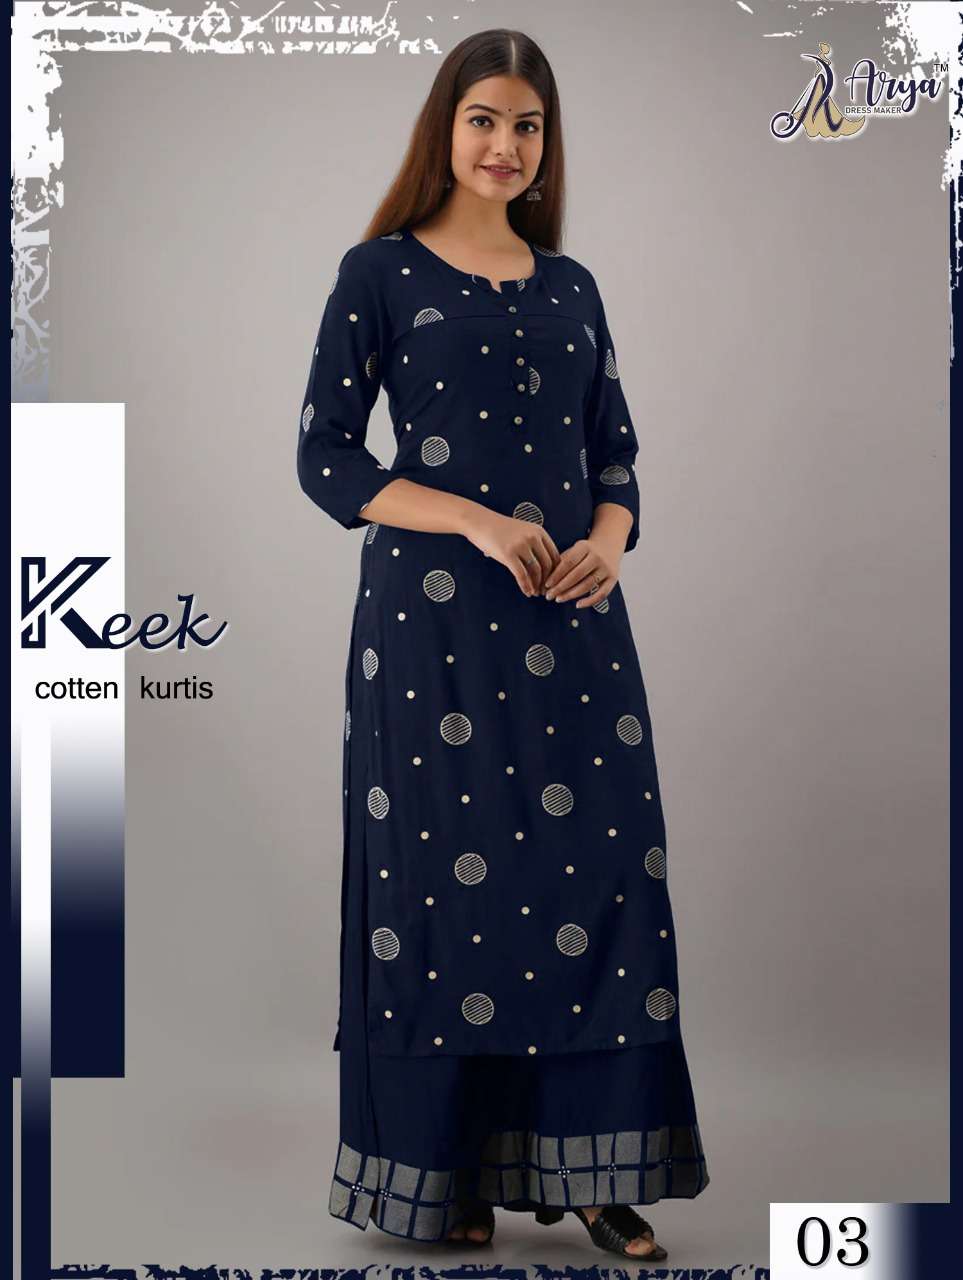 KEEK BY ARYA DRESS MAKER 01 TO 06 SERIES DESIGNER STYLISH FANCY COLORFUL BEAUTIFUL PARTY WEAR & ETHNIC WEAR COLLECTION RAYON COTTON KURTIS WITH BOTTOM AT WHOLESALE PRICE